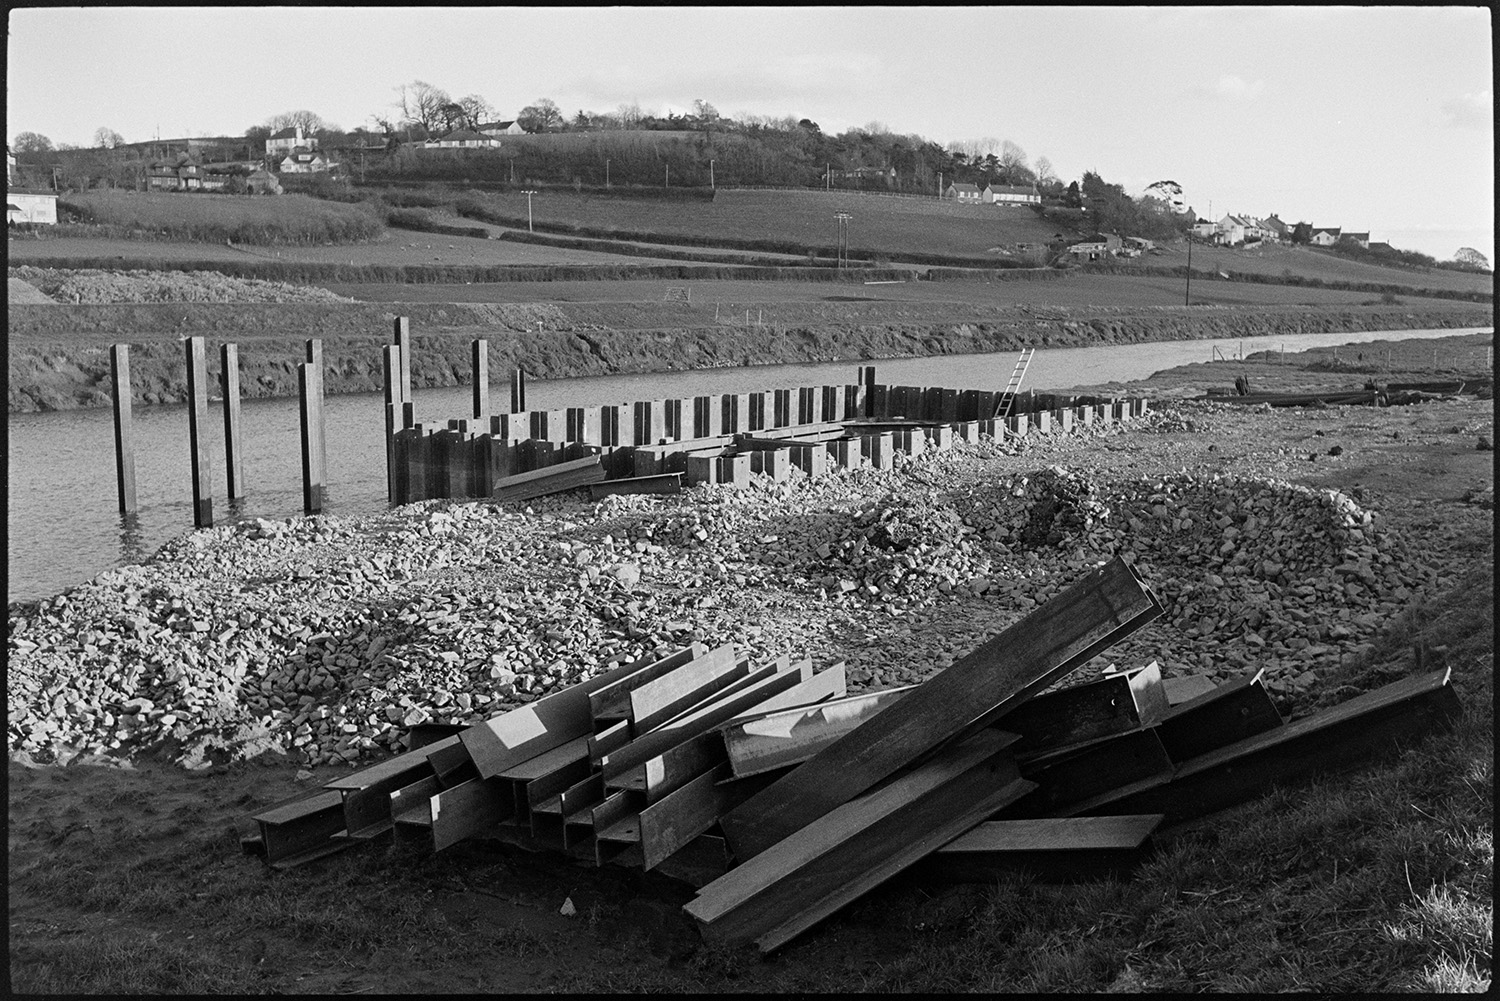 Engineers working on new river bridge for motorway link road.
[Steel girders and piles on the bank of the River Taw near Barnstaple being used in the construction of a bridge.]